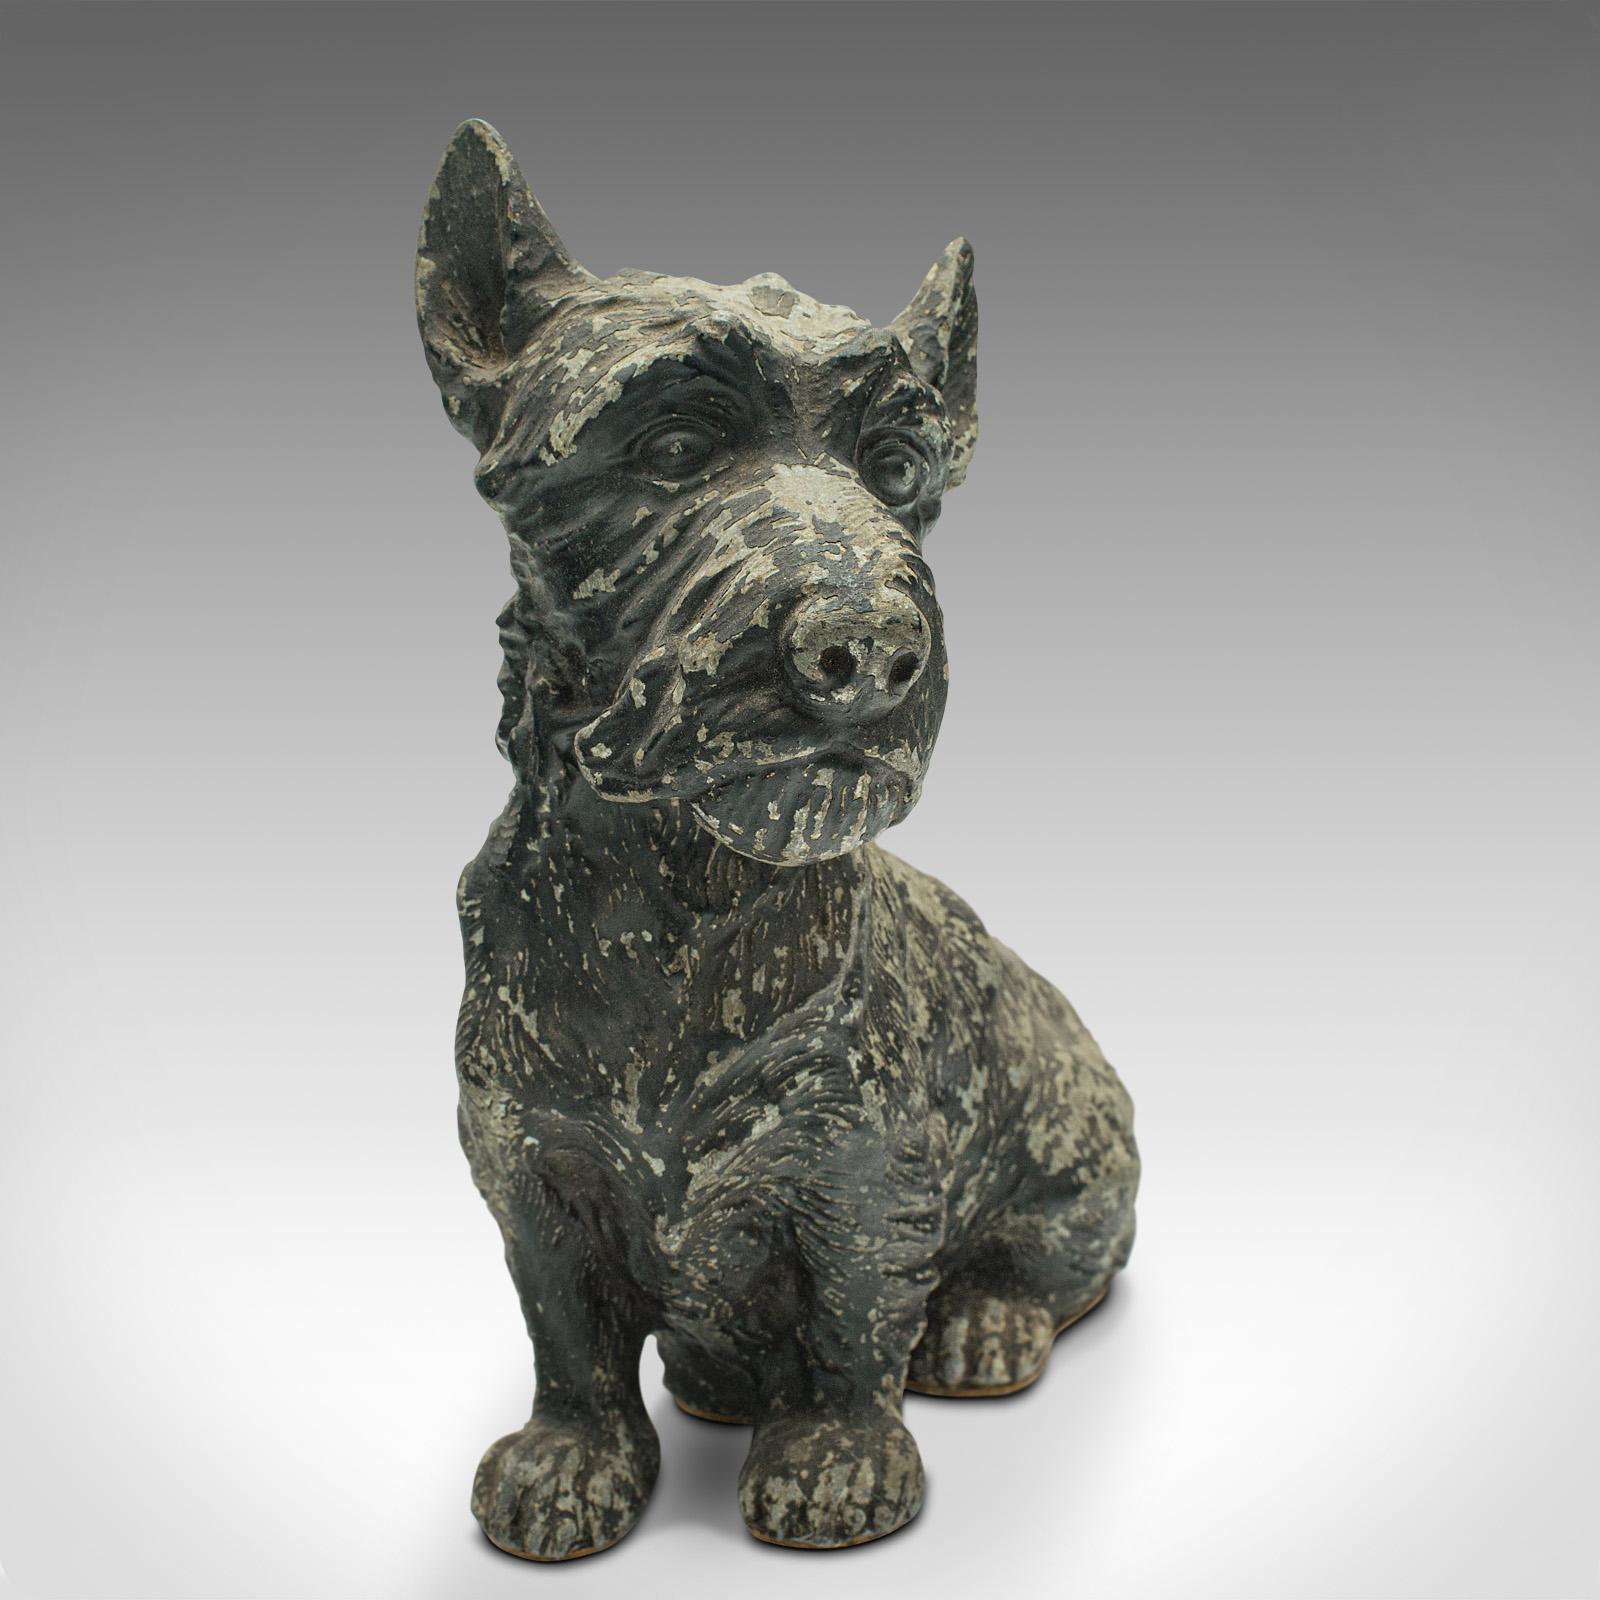 This is an antique decorative Scottish Terrier. A British, spelter ornamental Scottie dog, dating to the Edwardian period, circa 1910. 

Exudes character and appealing weathering
Displaying a desirable aged patina and in good original